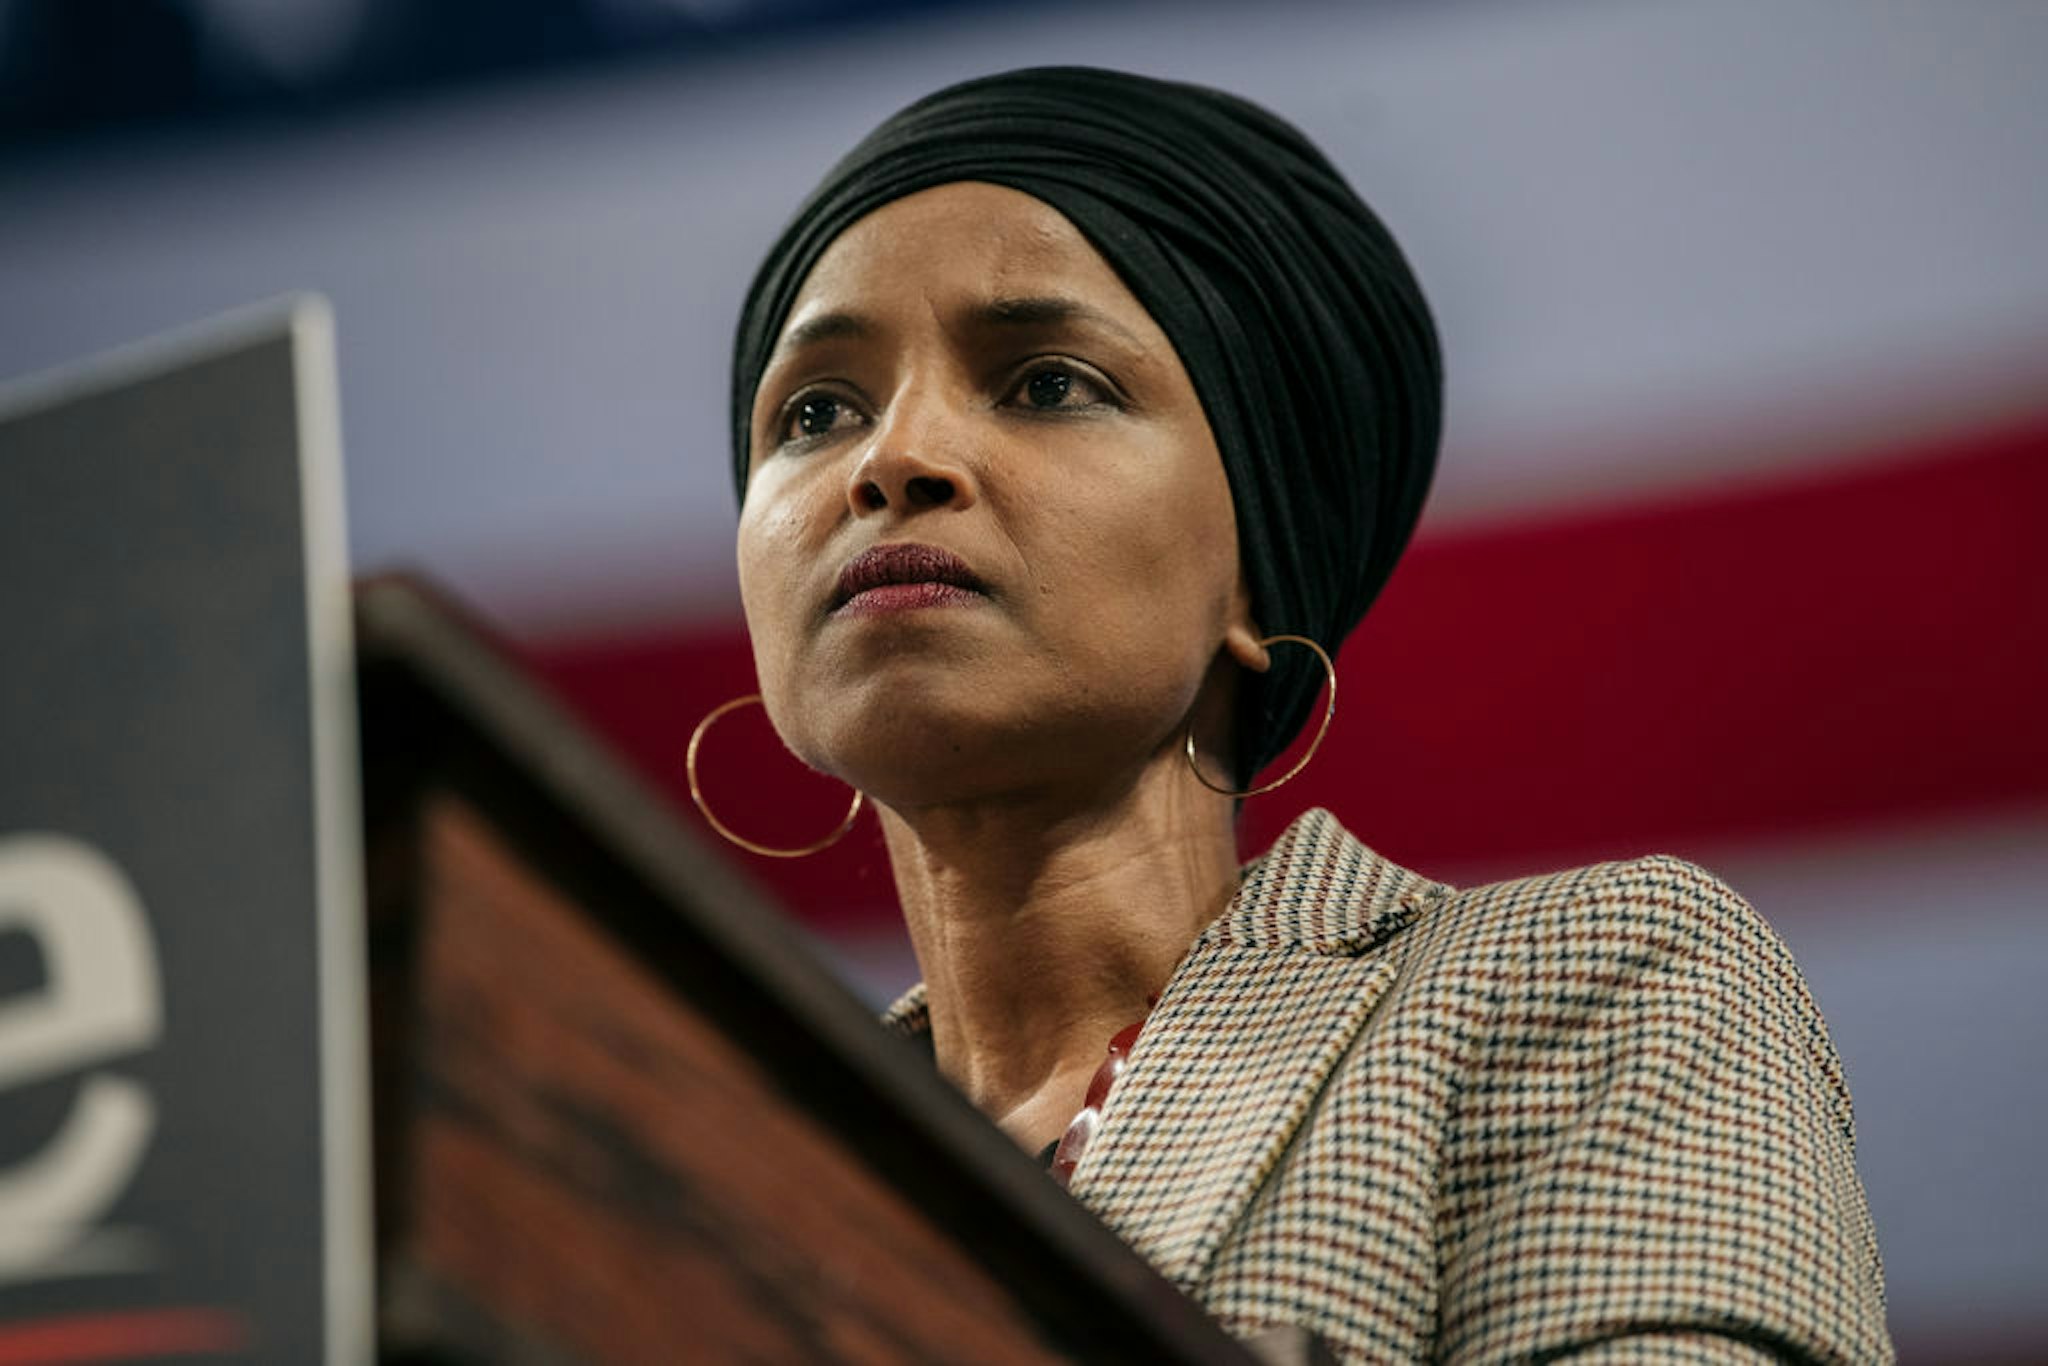 Representative Ilhan Omar (D-MN) speaks at a campaign rally for Senator (I-VT) and presidential candidate Bernie Sanders at the University of Minnesotas Williams Arena on November, 3, 2019 in Minneapolis, Minnesota.